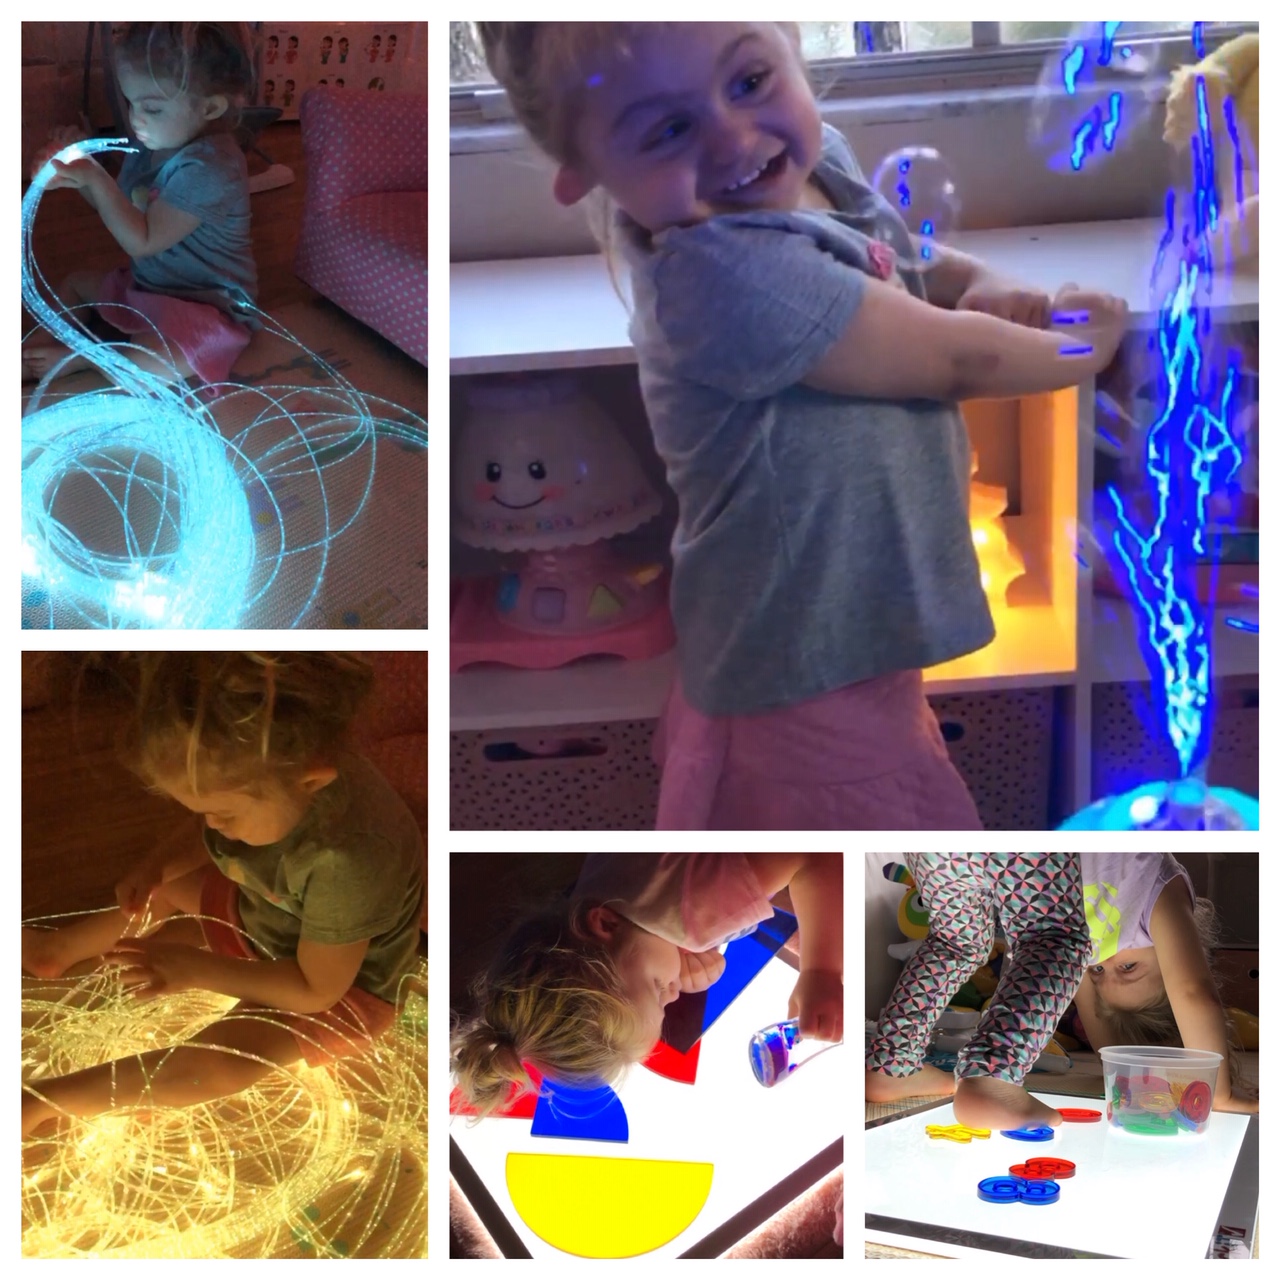 A girl plays with light strings and toys.